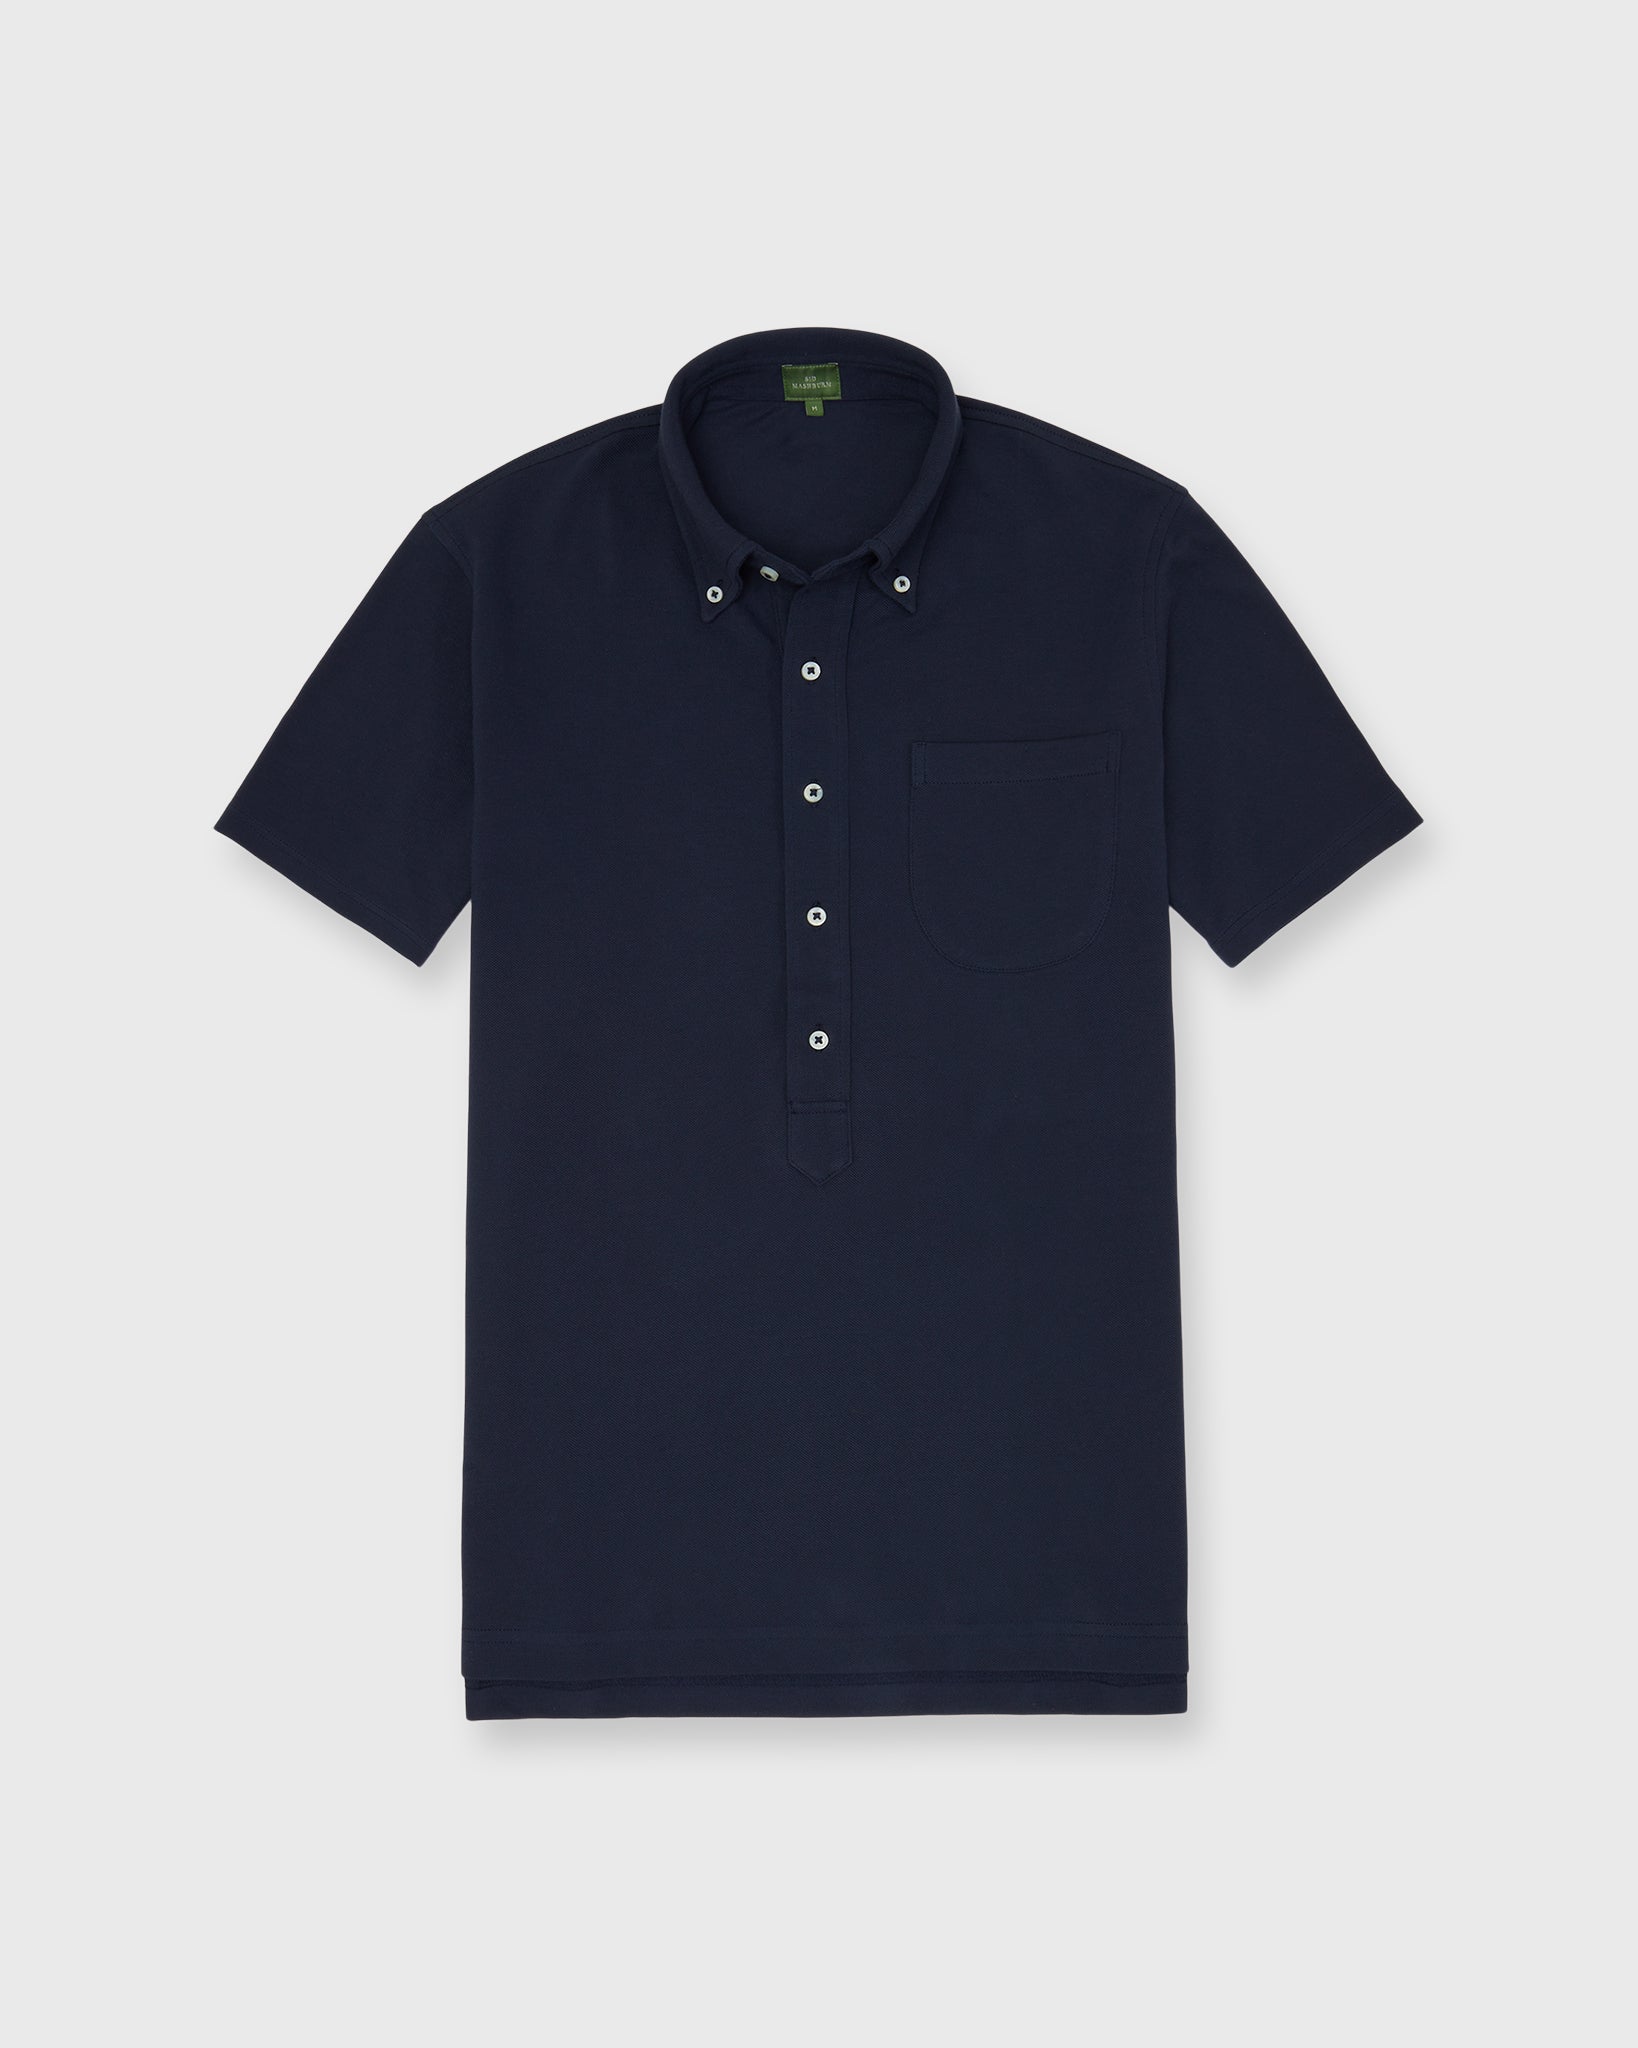 Short-Sleeved Knit Button-Down Popover Shirt in Navy Pima Pique